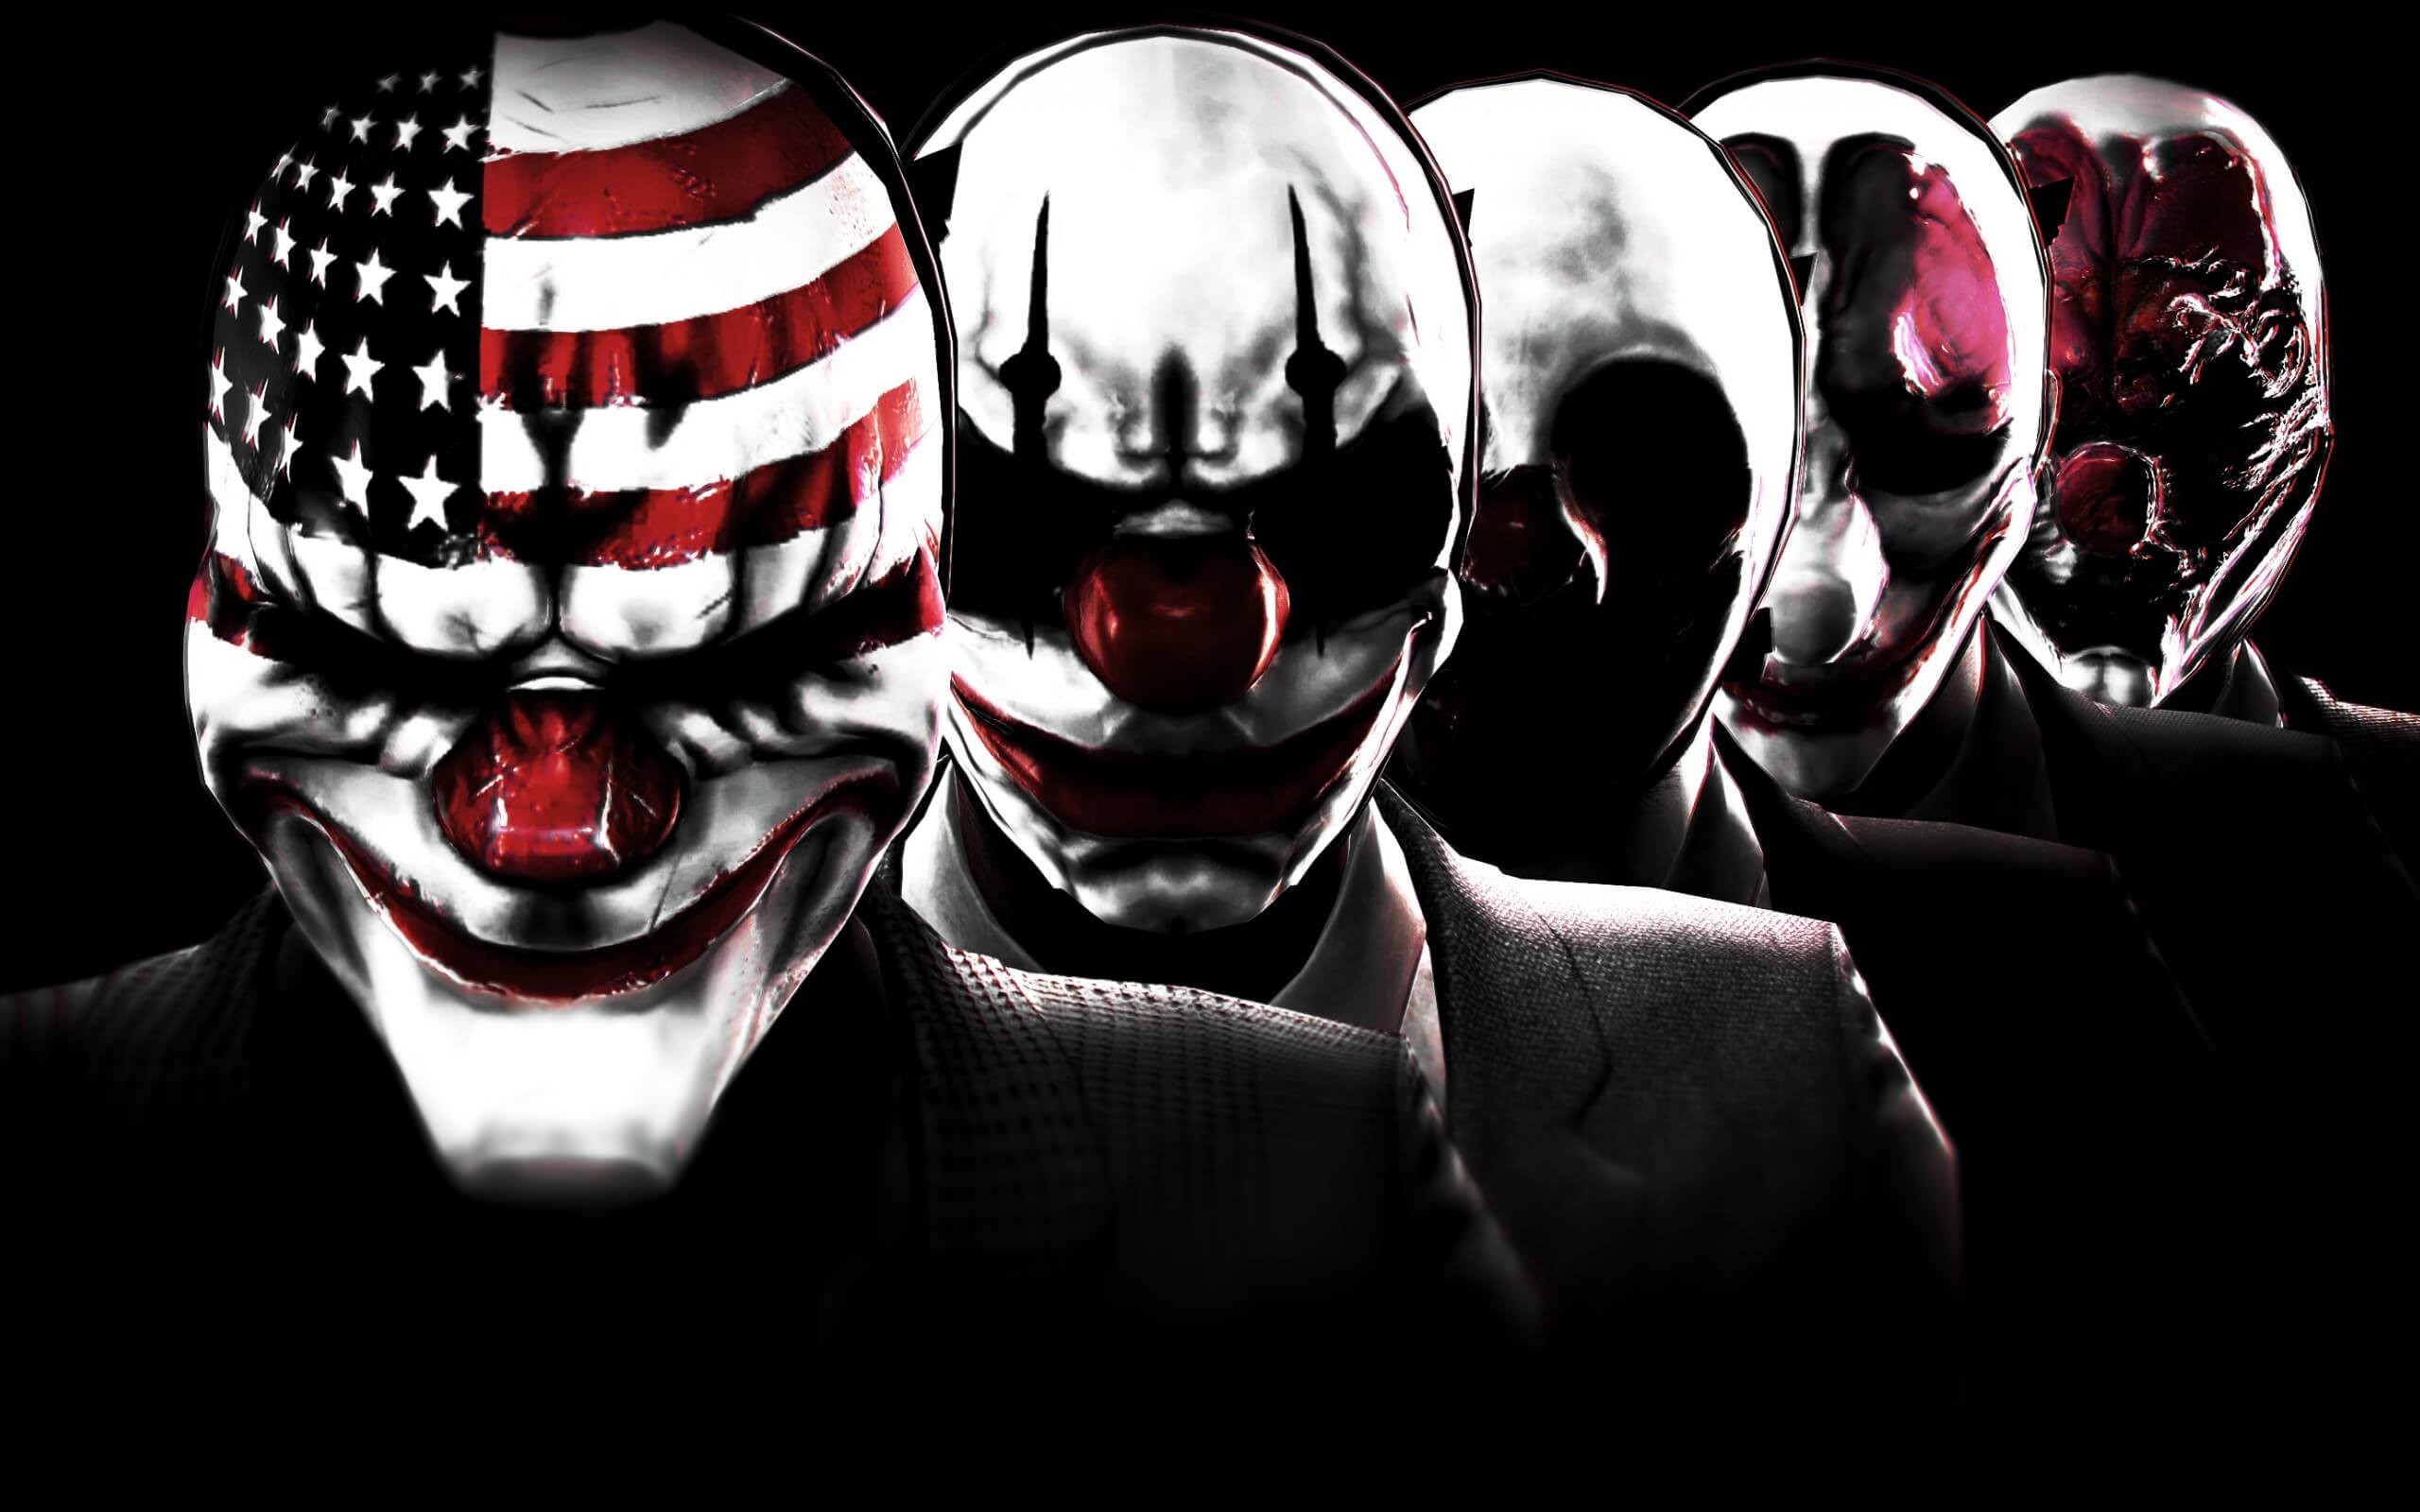 download PAYDAY 2